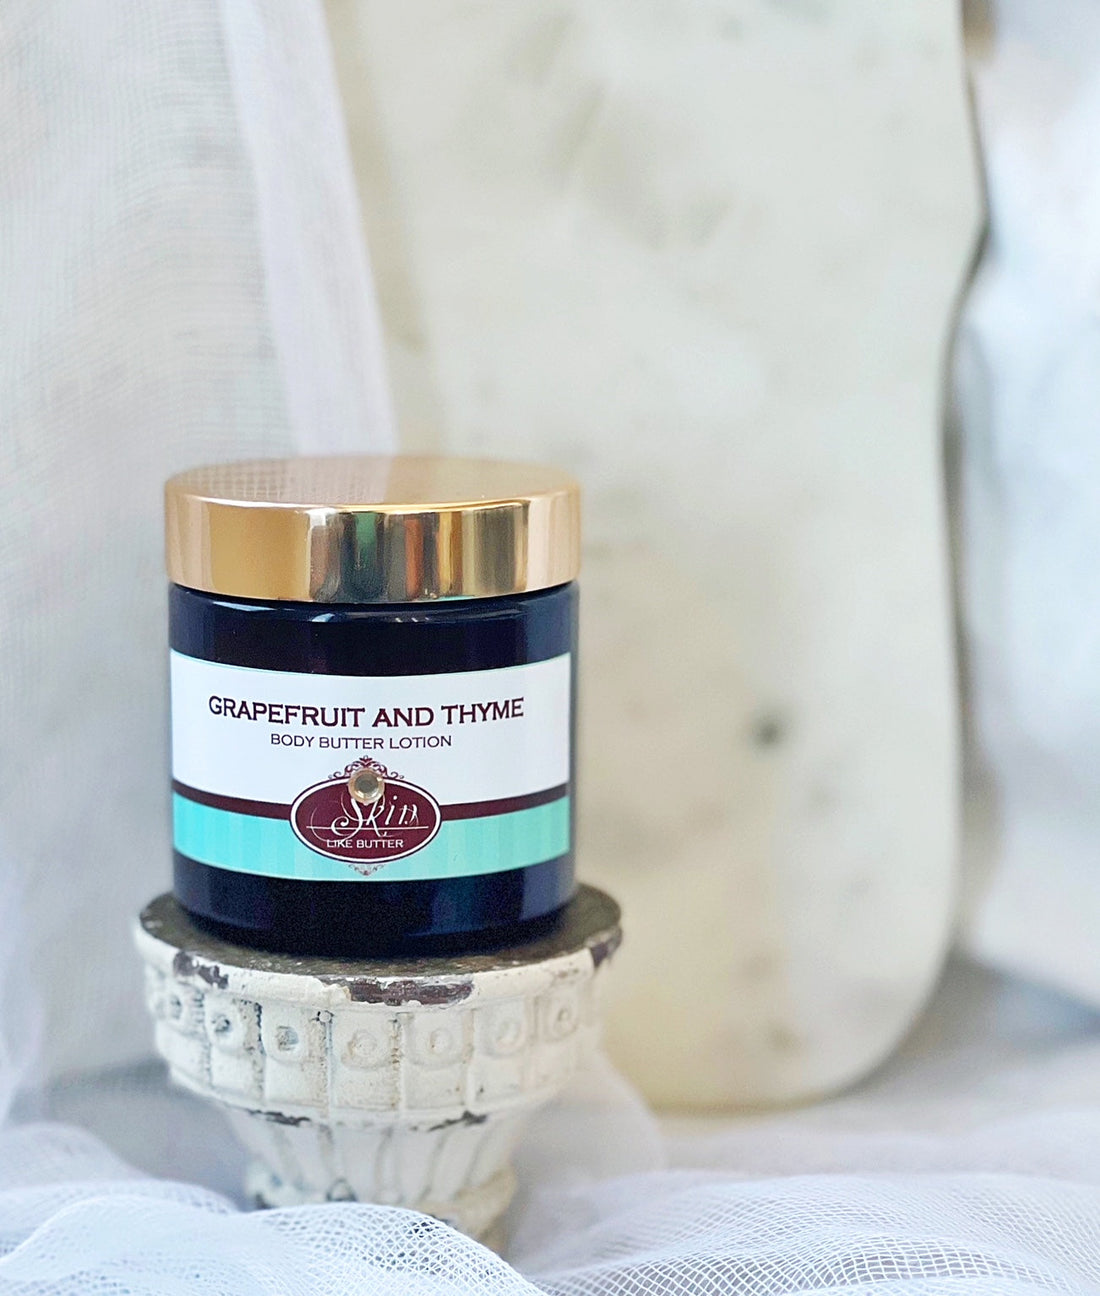 ROSEMARY LEMON scented Body Butter, waterfree and non-greasy, vegan